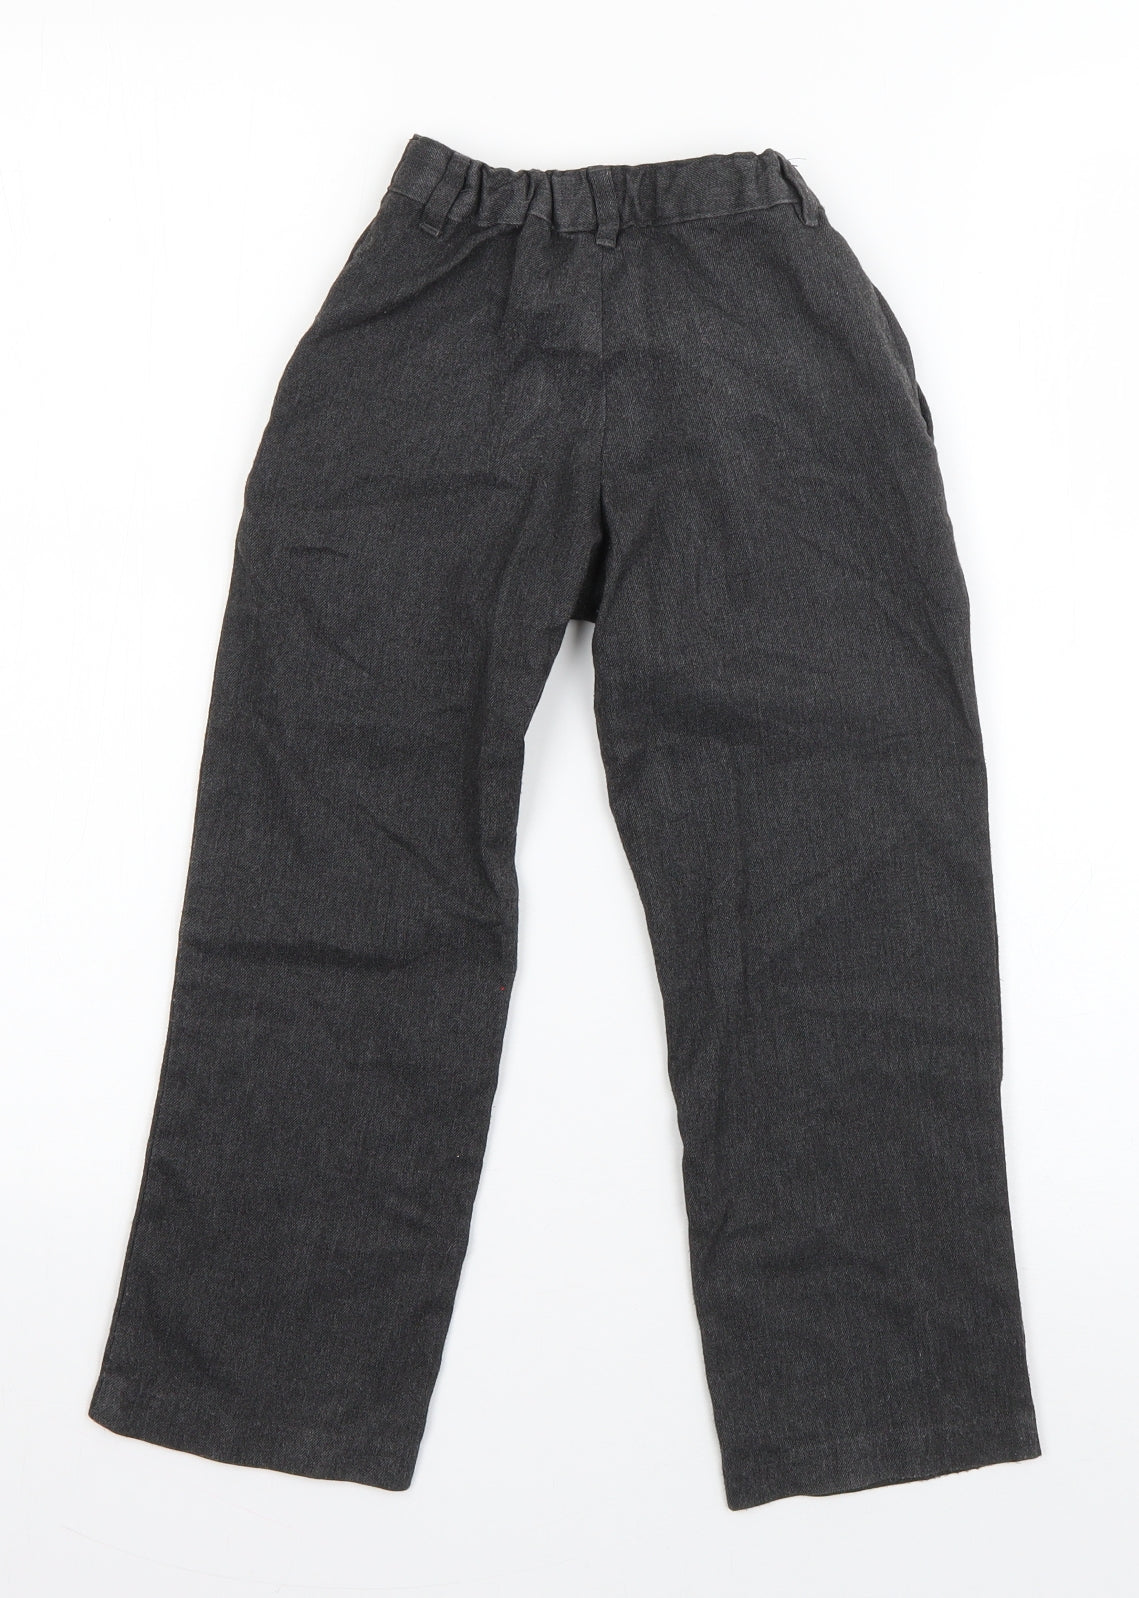 George Boys Grey  Polyester Dress Pants Trousers Size 5-6 Years  Regular Zip